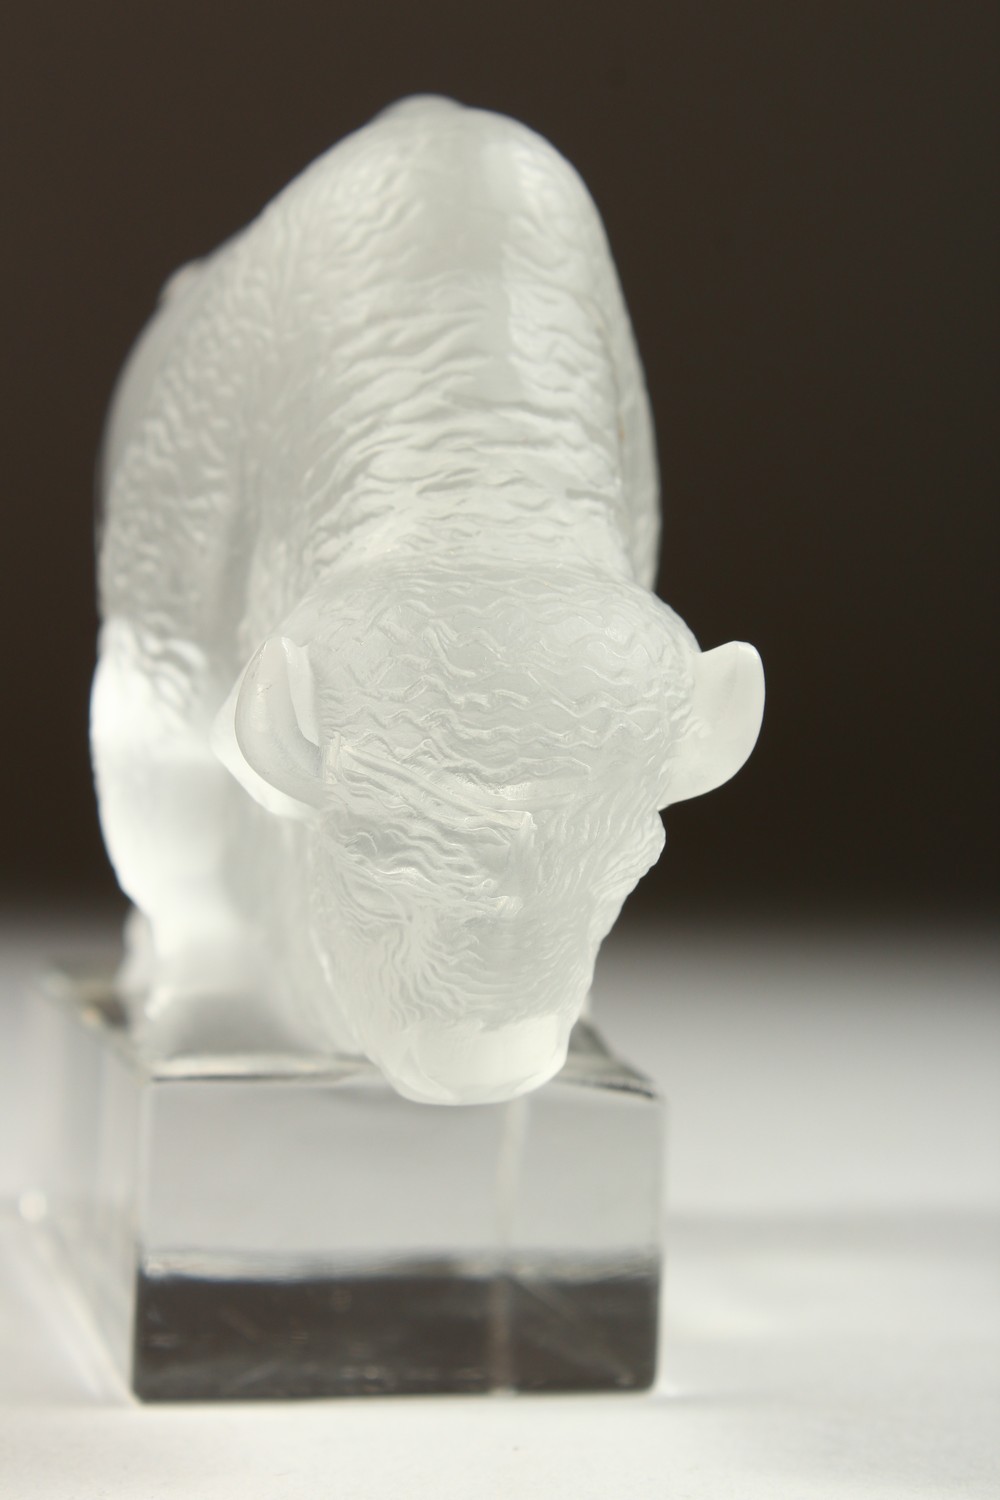 A LALIQUE FROSTED GLASS MODEL OF A BISON. Etched LALIQUE, FRANCE. 12cms long. - Image 3 of 9